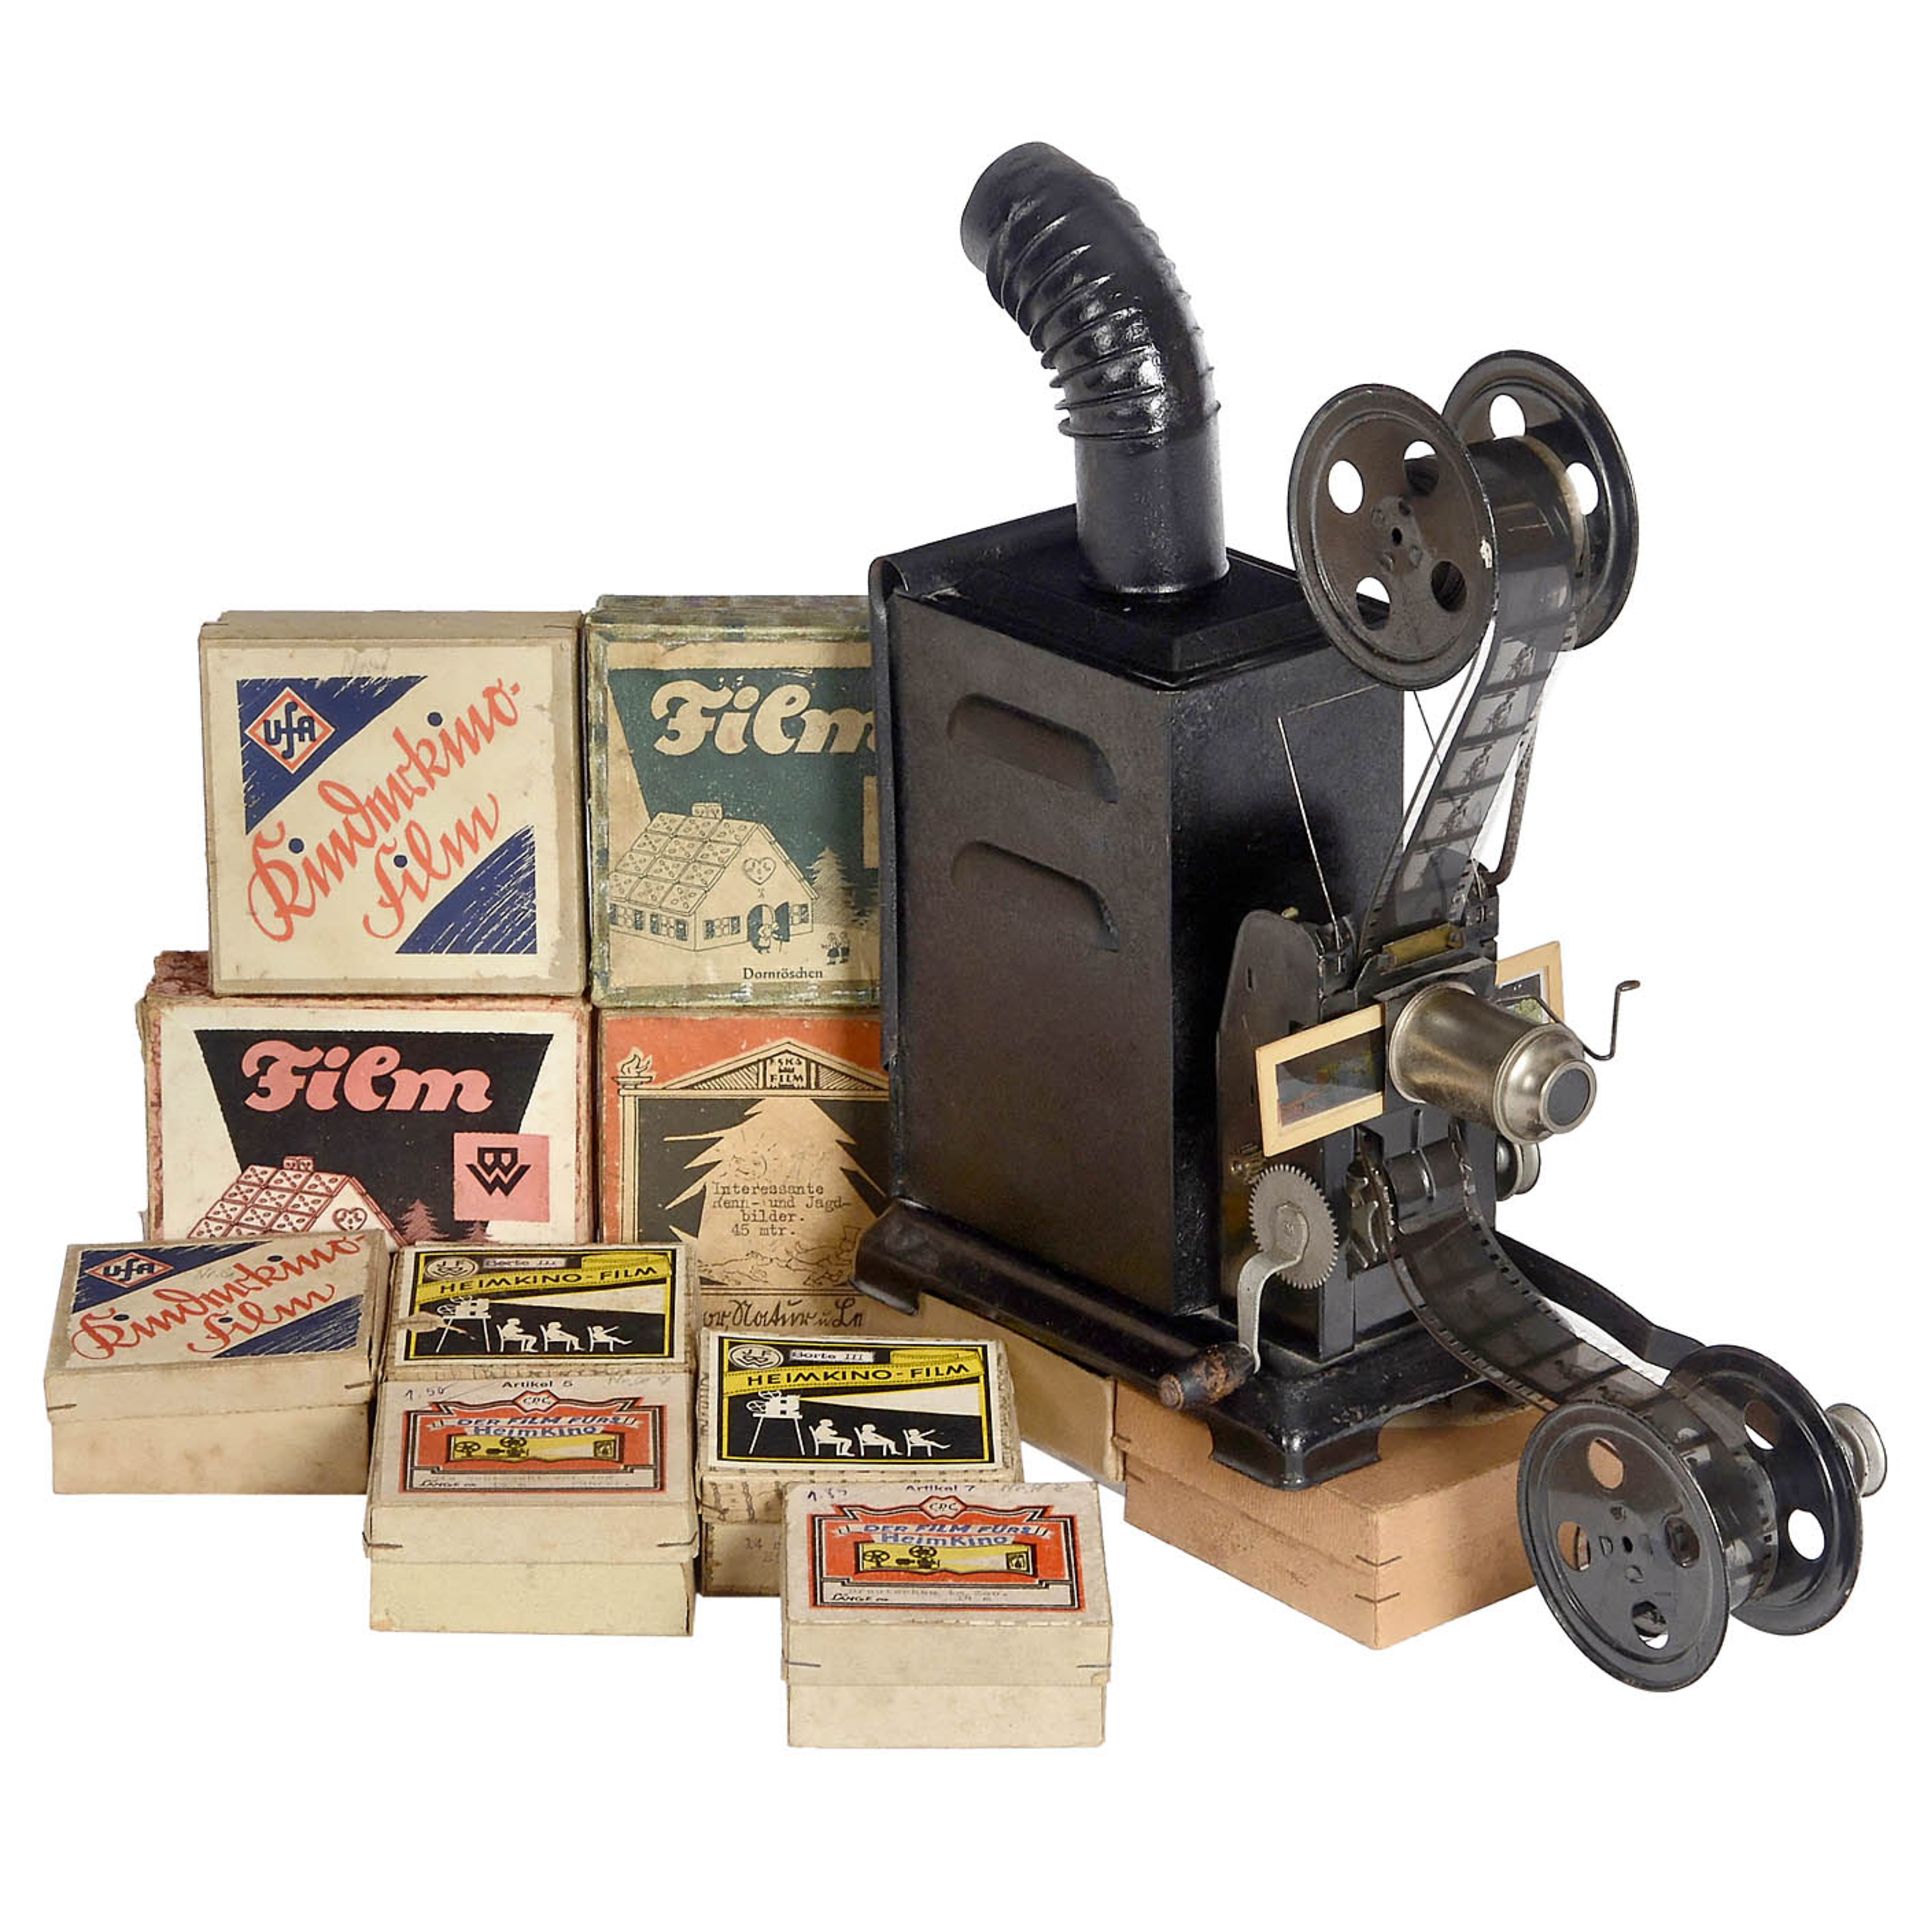 Three 35mm Table Projectors, c. 1920 - Image 4 of 4